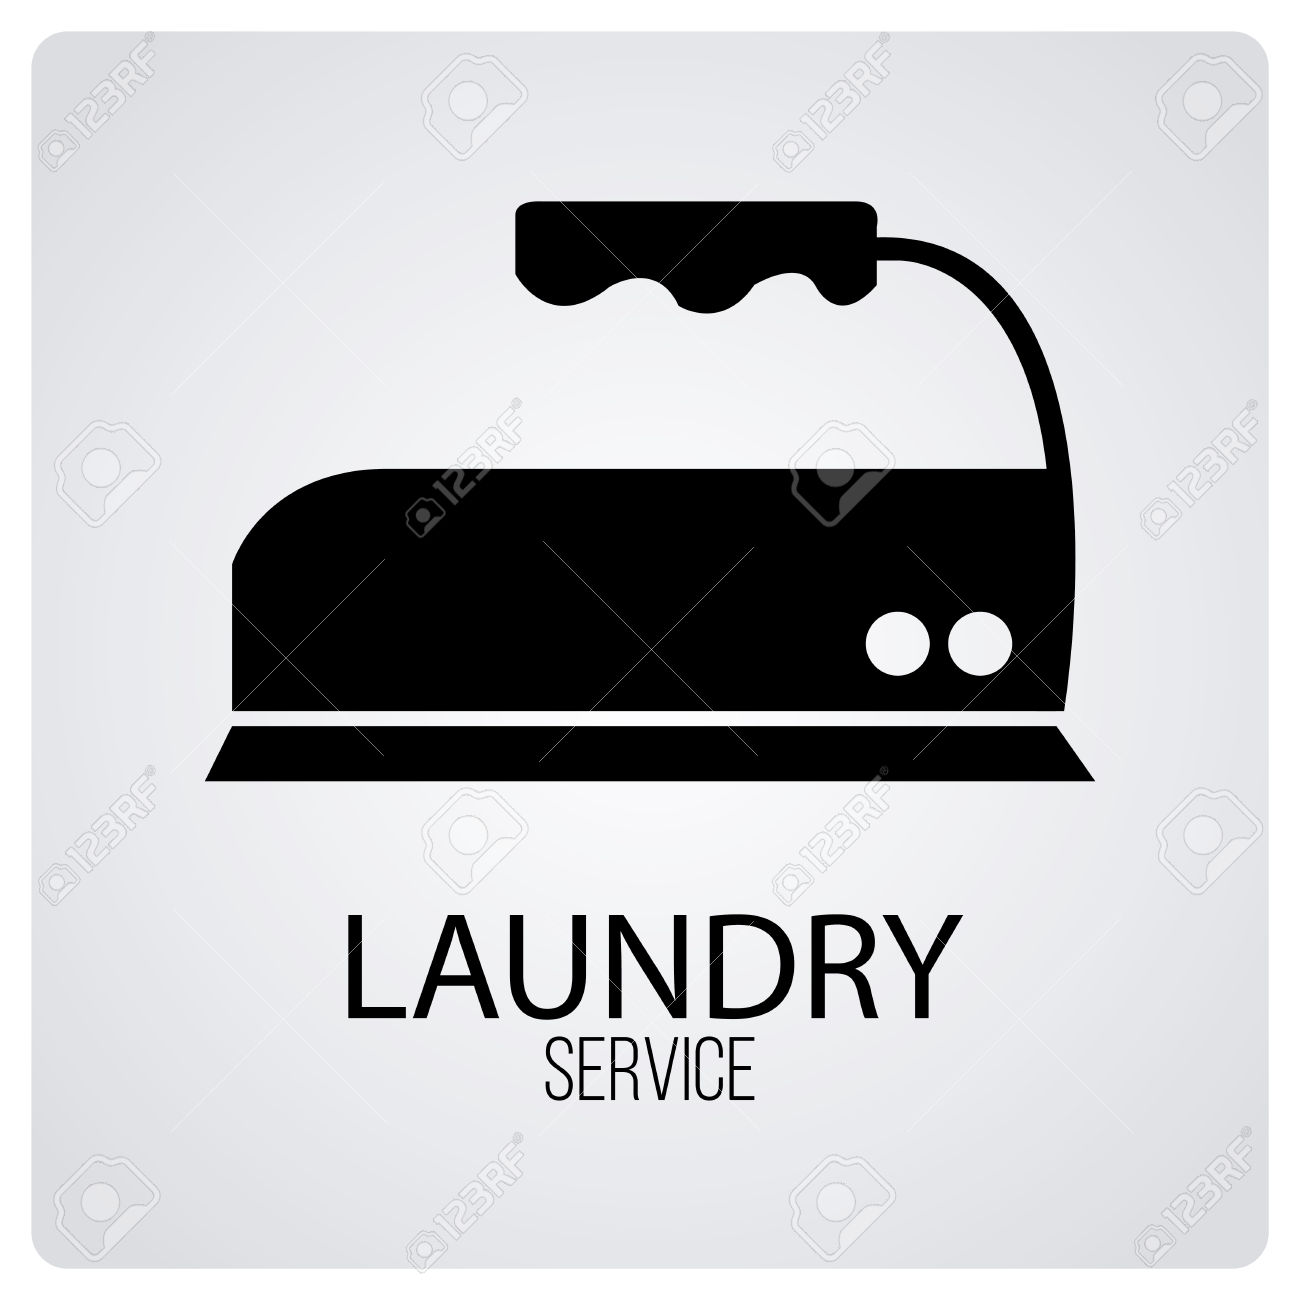 Laundry Service Over Degrade Color Background Royalty Free.